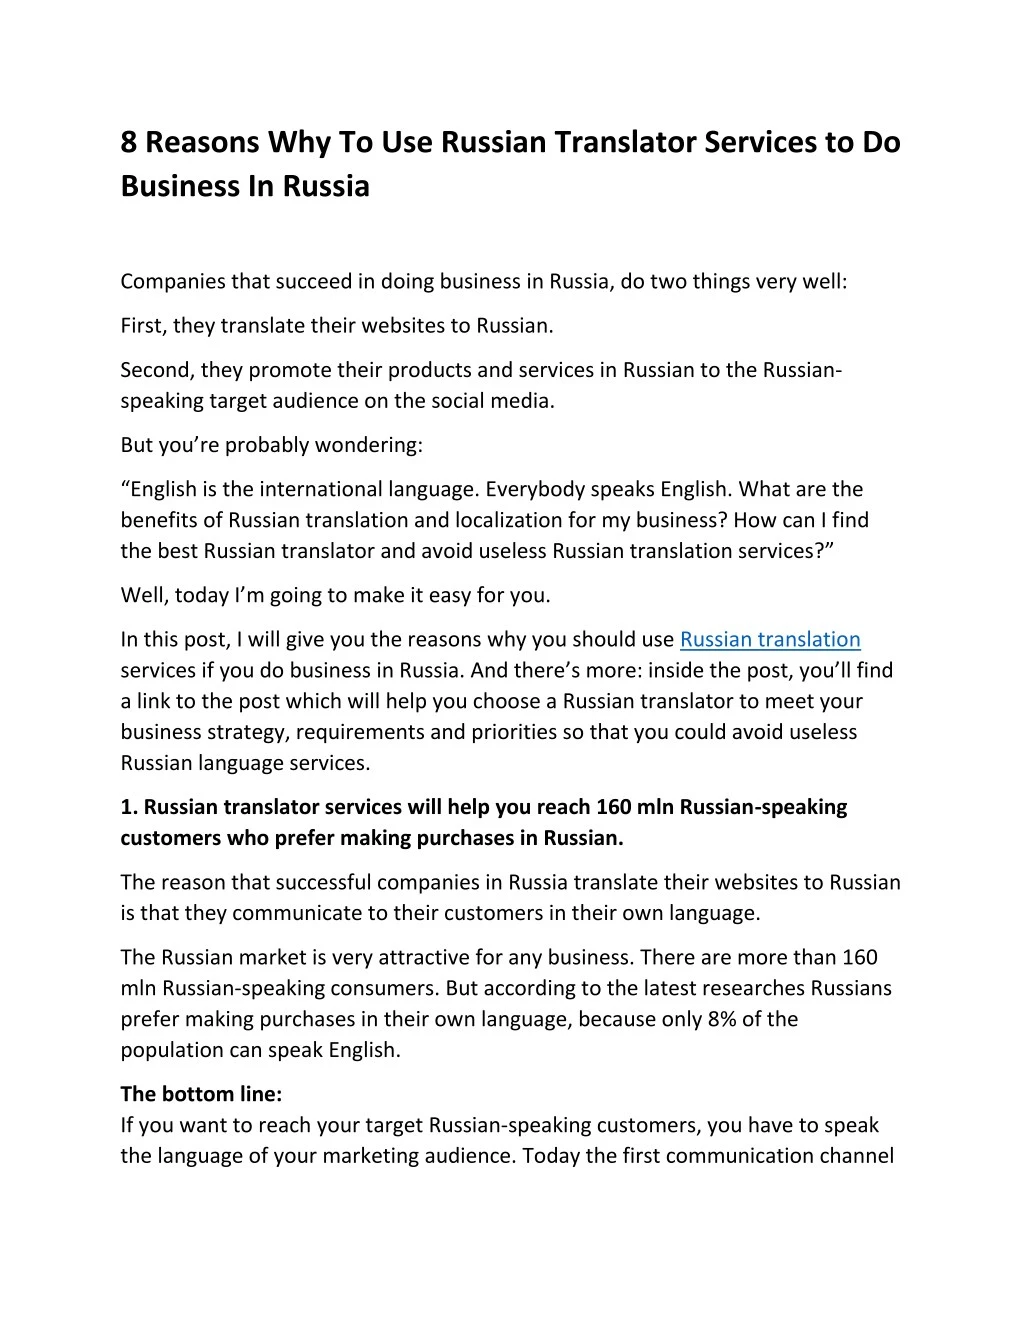 8 reasons why to use russian translator services